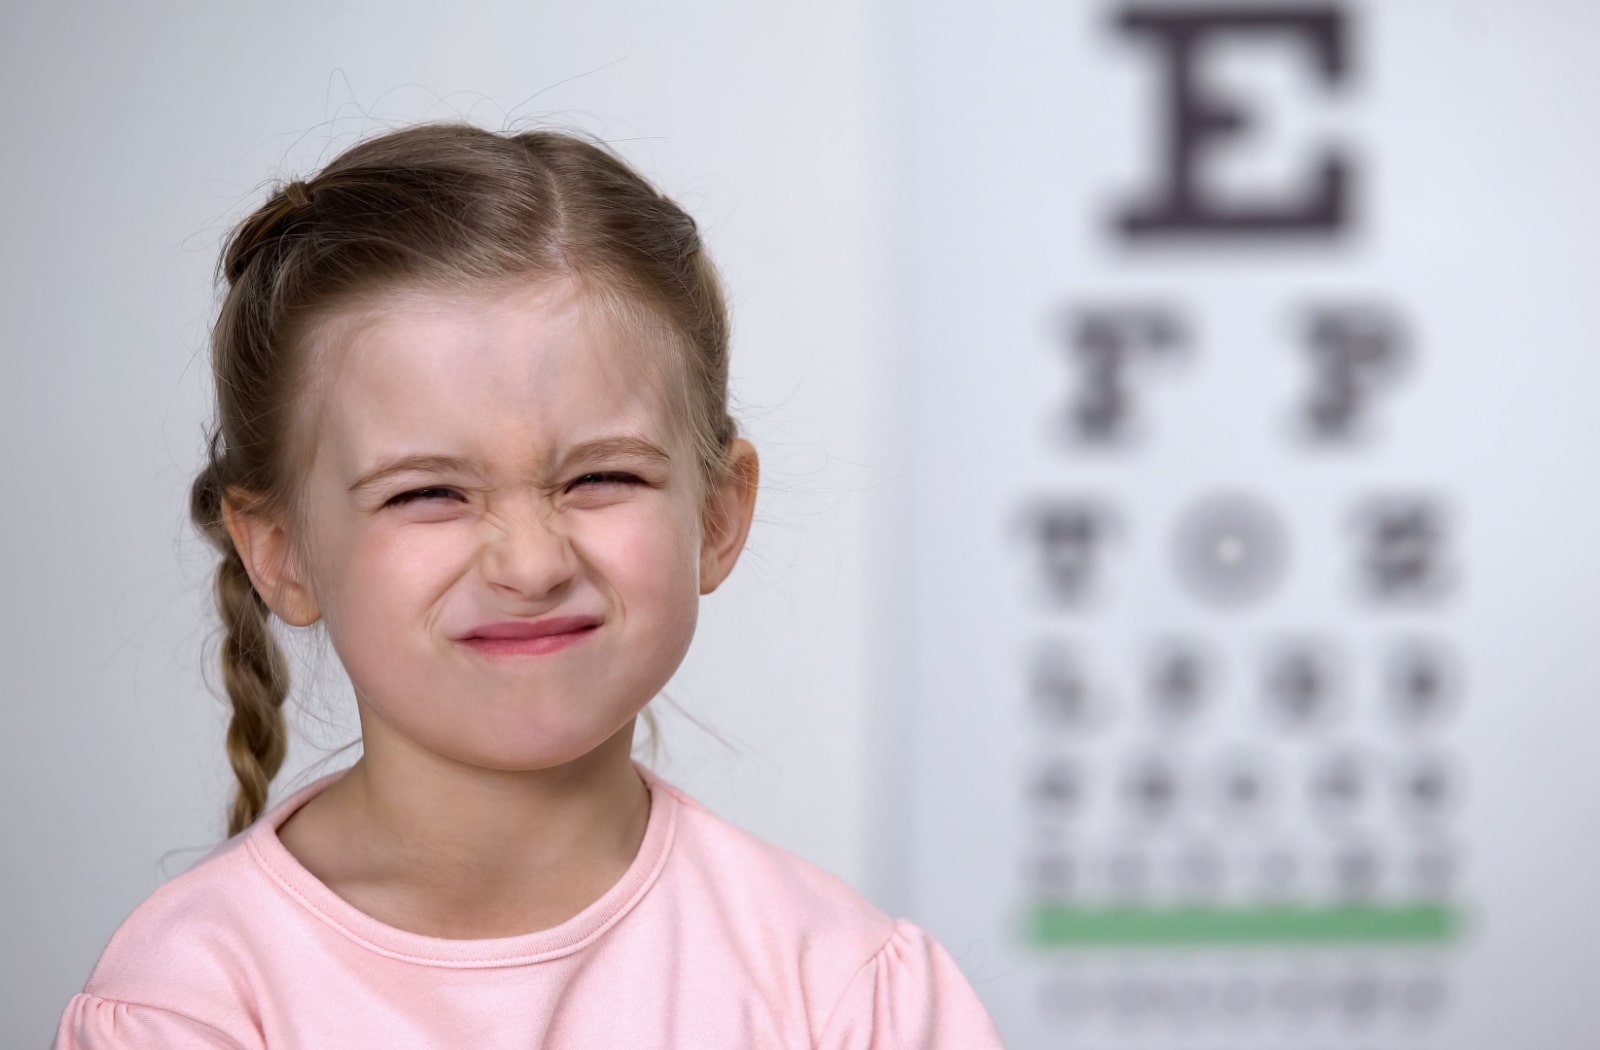 A young girl standing in front of a Snellen eye chart and squinting. Squinting may be a sign of refractive errors in your child's vision. 